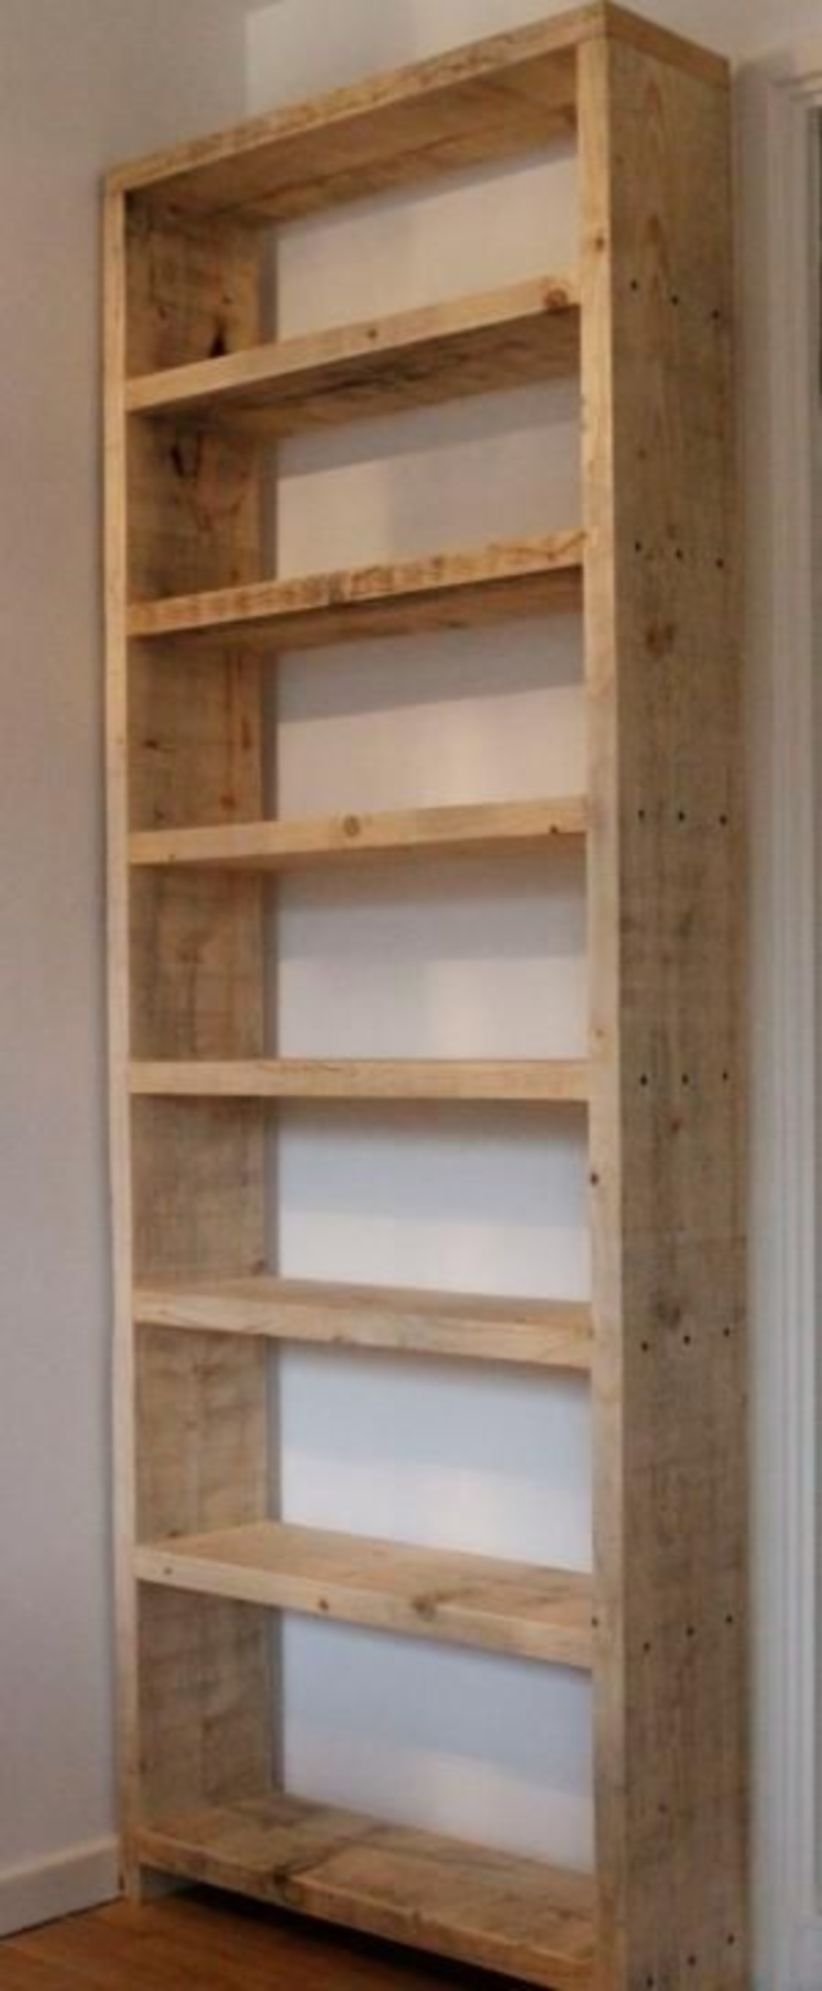 Great guide to awesome diy shelves